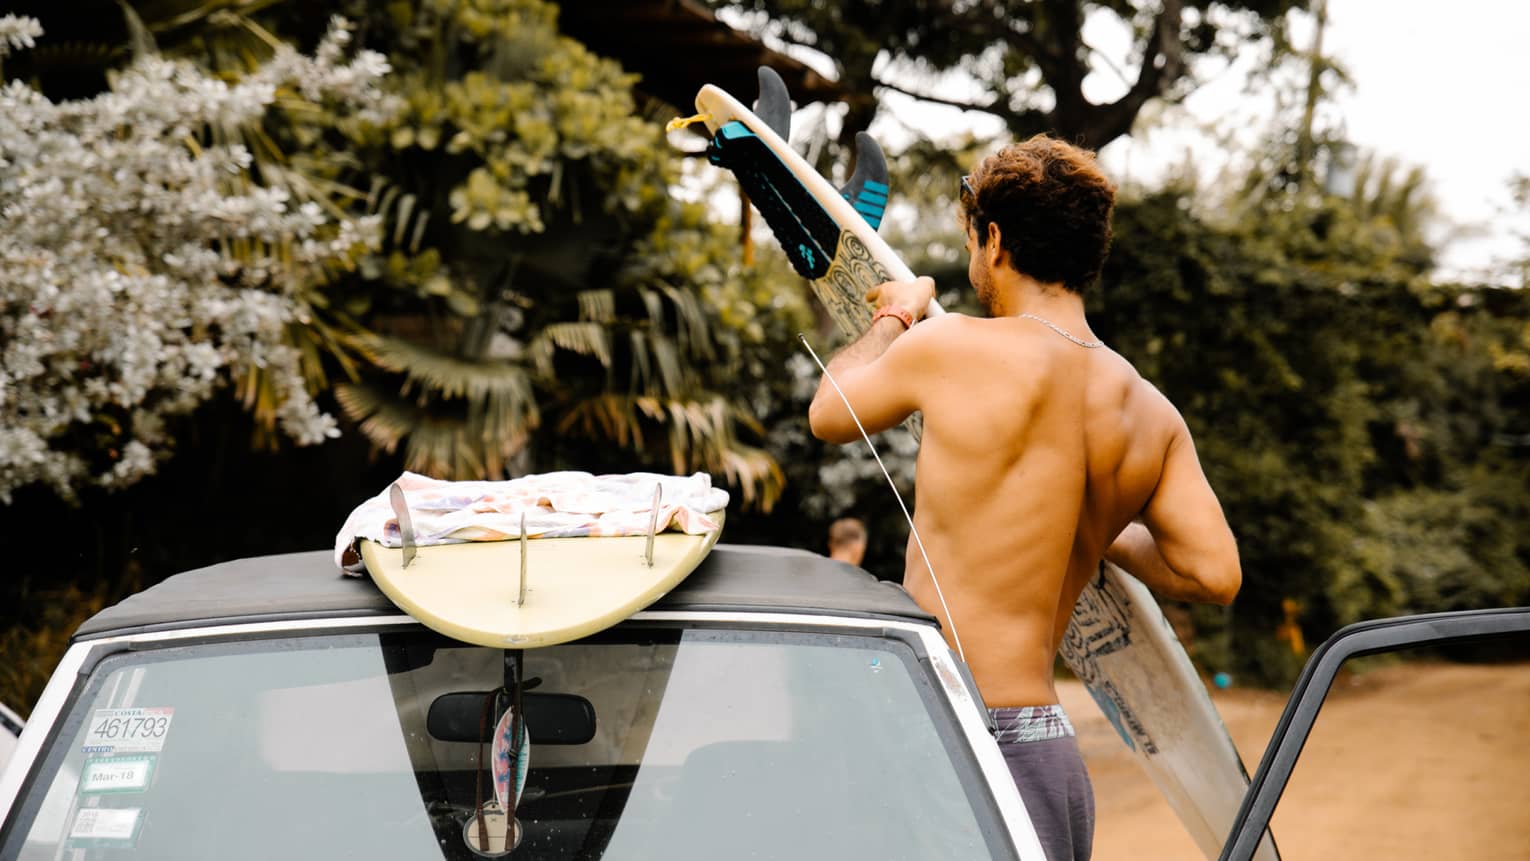 Opposite green and white foliage, a beachwear-clad surfer grips a surfboard, preparing to load it onto the roof of a car. 